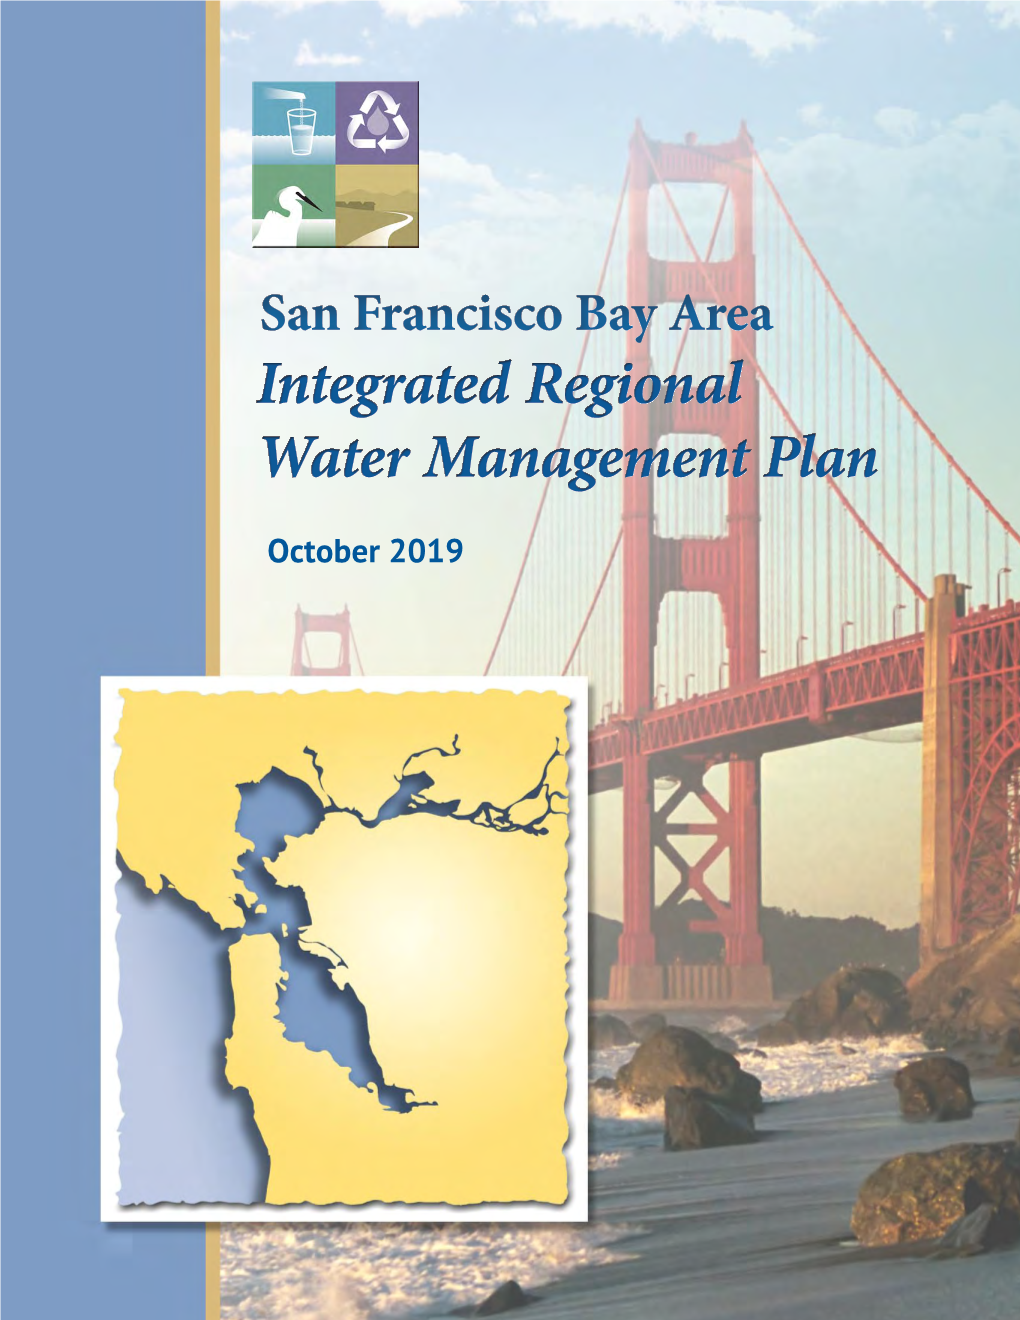 San Francisco Bay Area Integrated Regional Water Management Plan